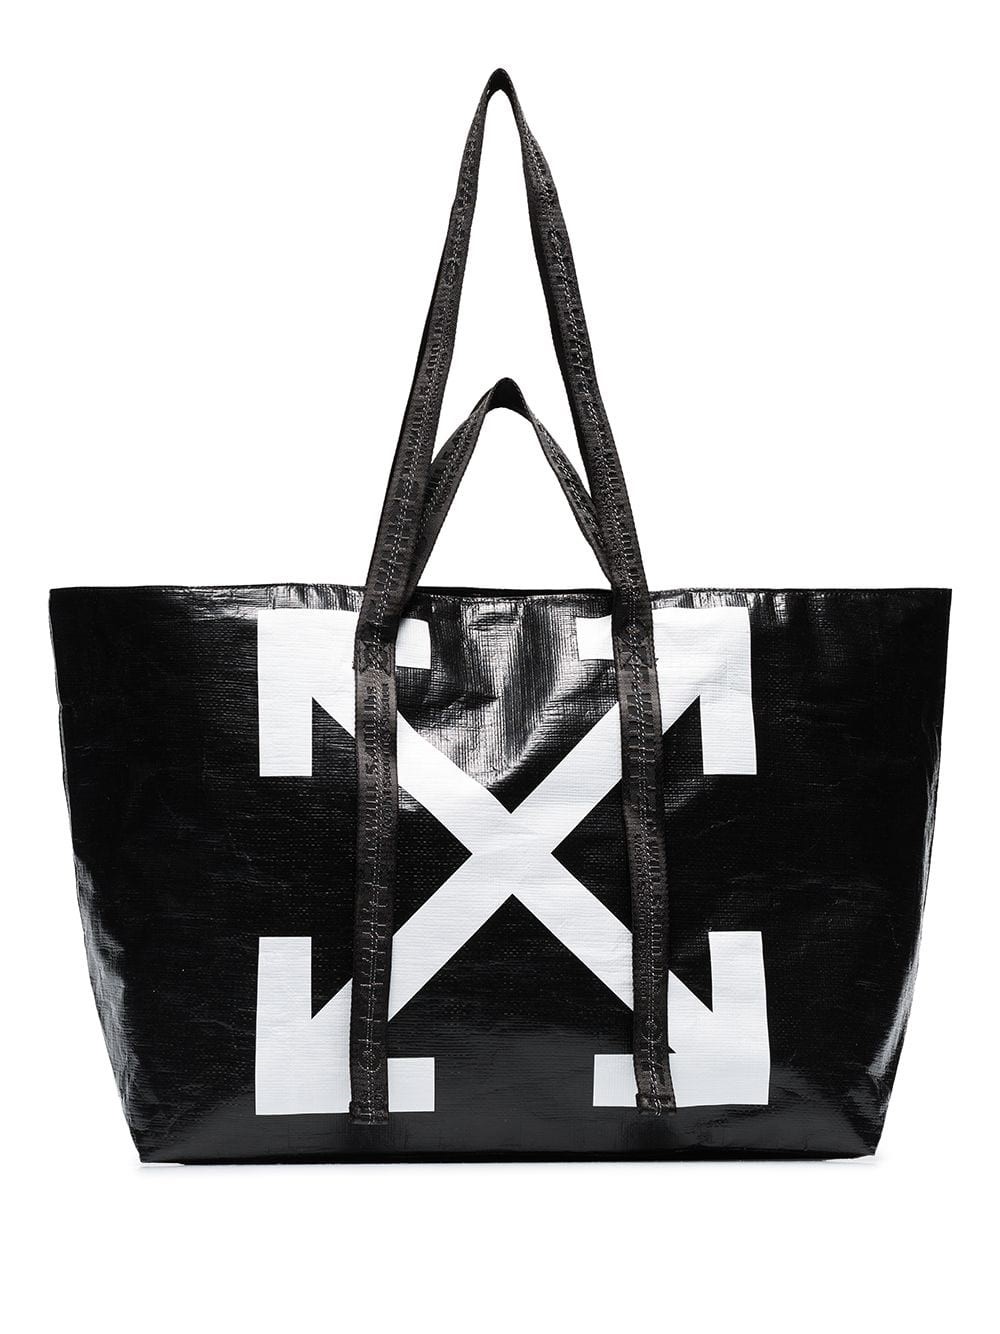 off-white LOGO TOTE BAG available on montiboutique.com - 29945